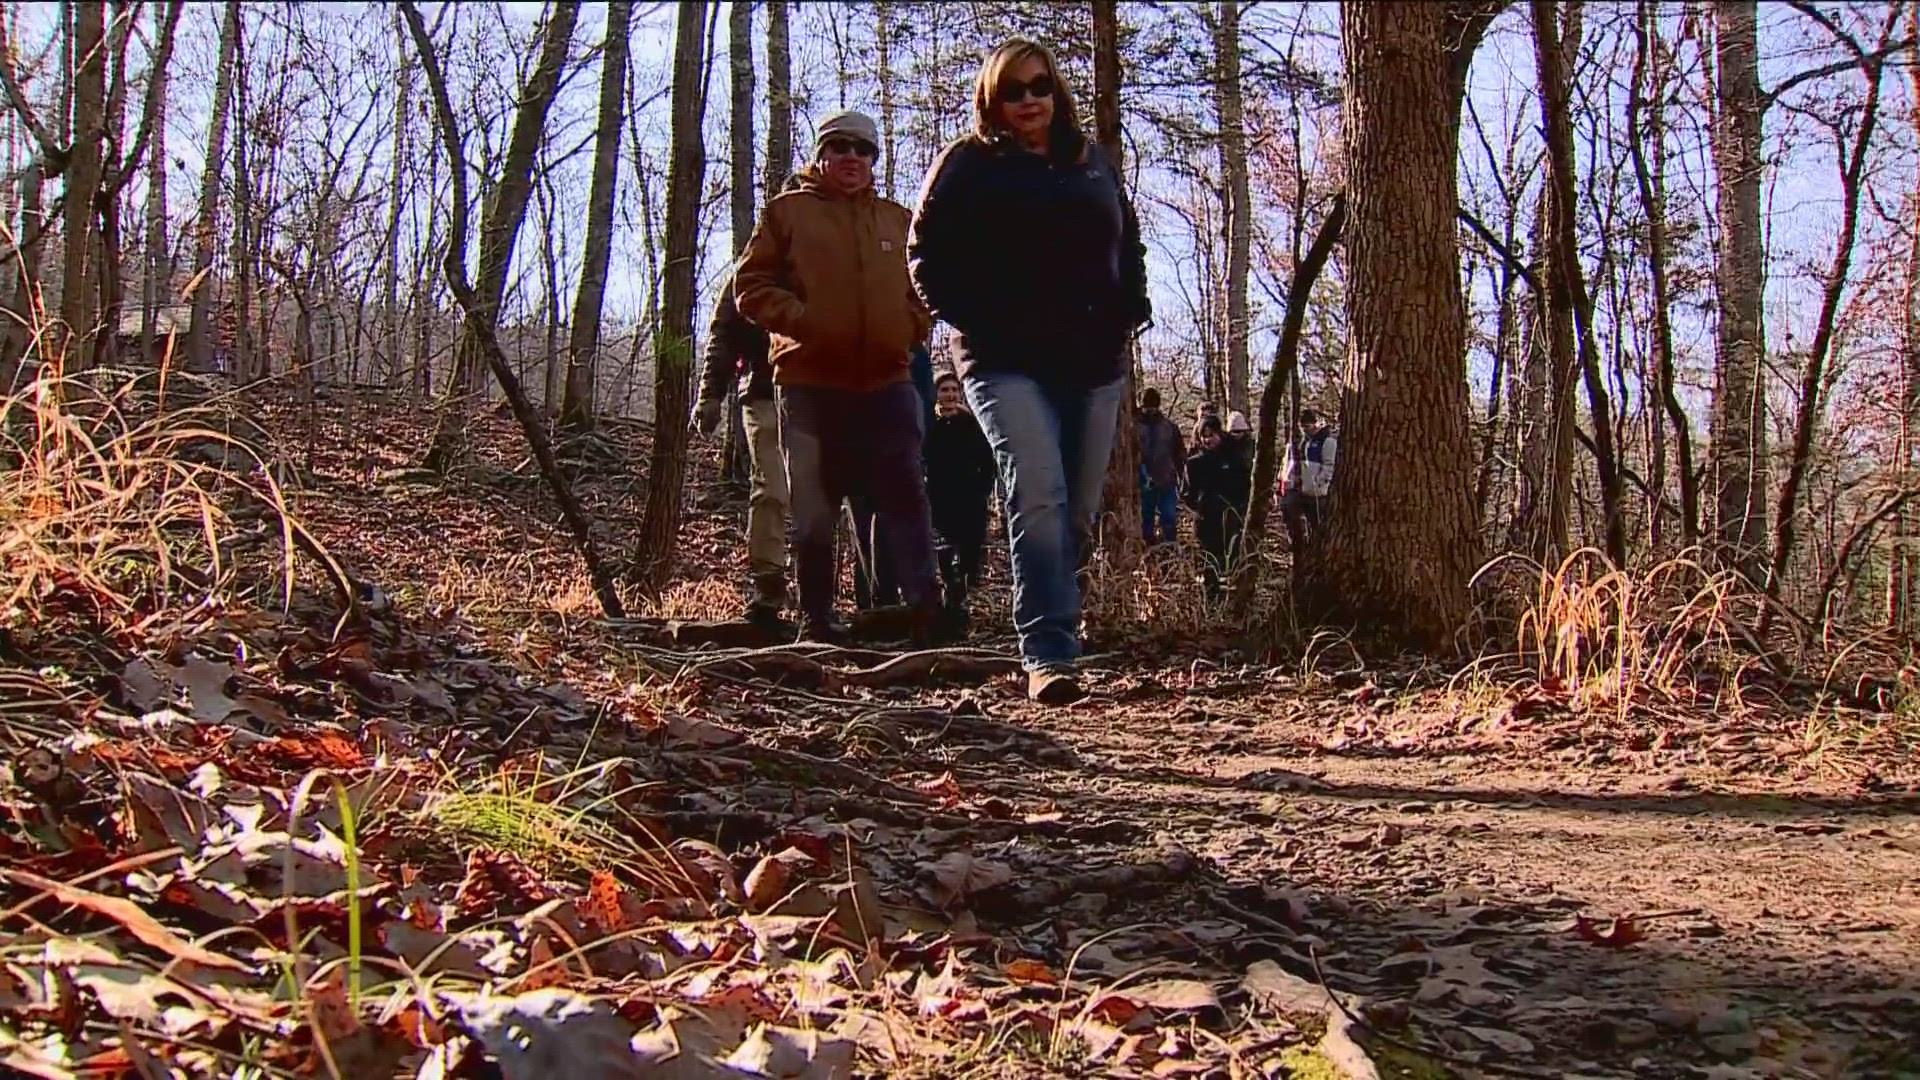 "First Day Hikes" is a nationwide program that allows people to welcome the New Year in the outdoors with free guided hikes at local state parks.